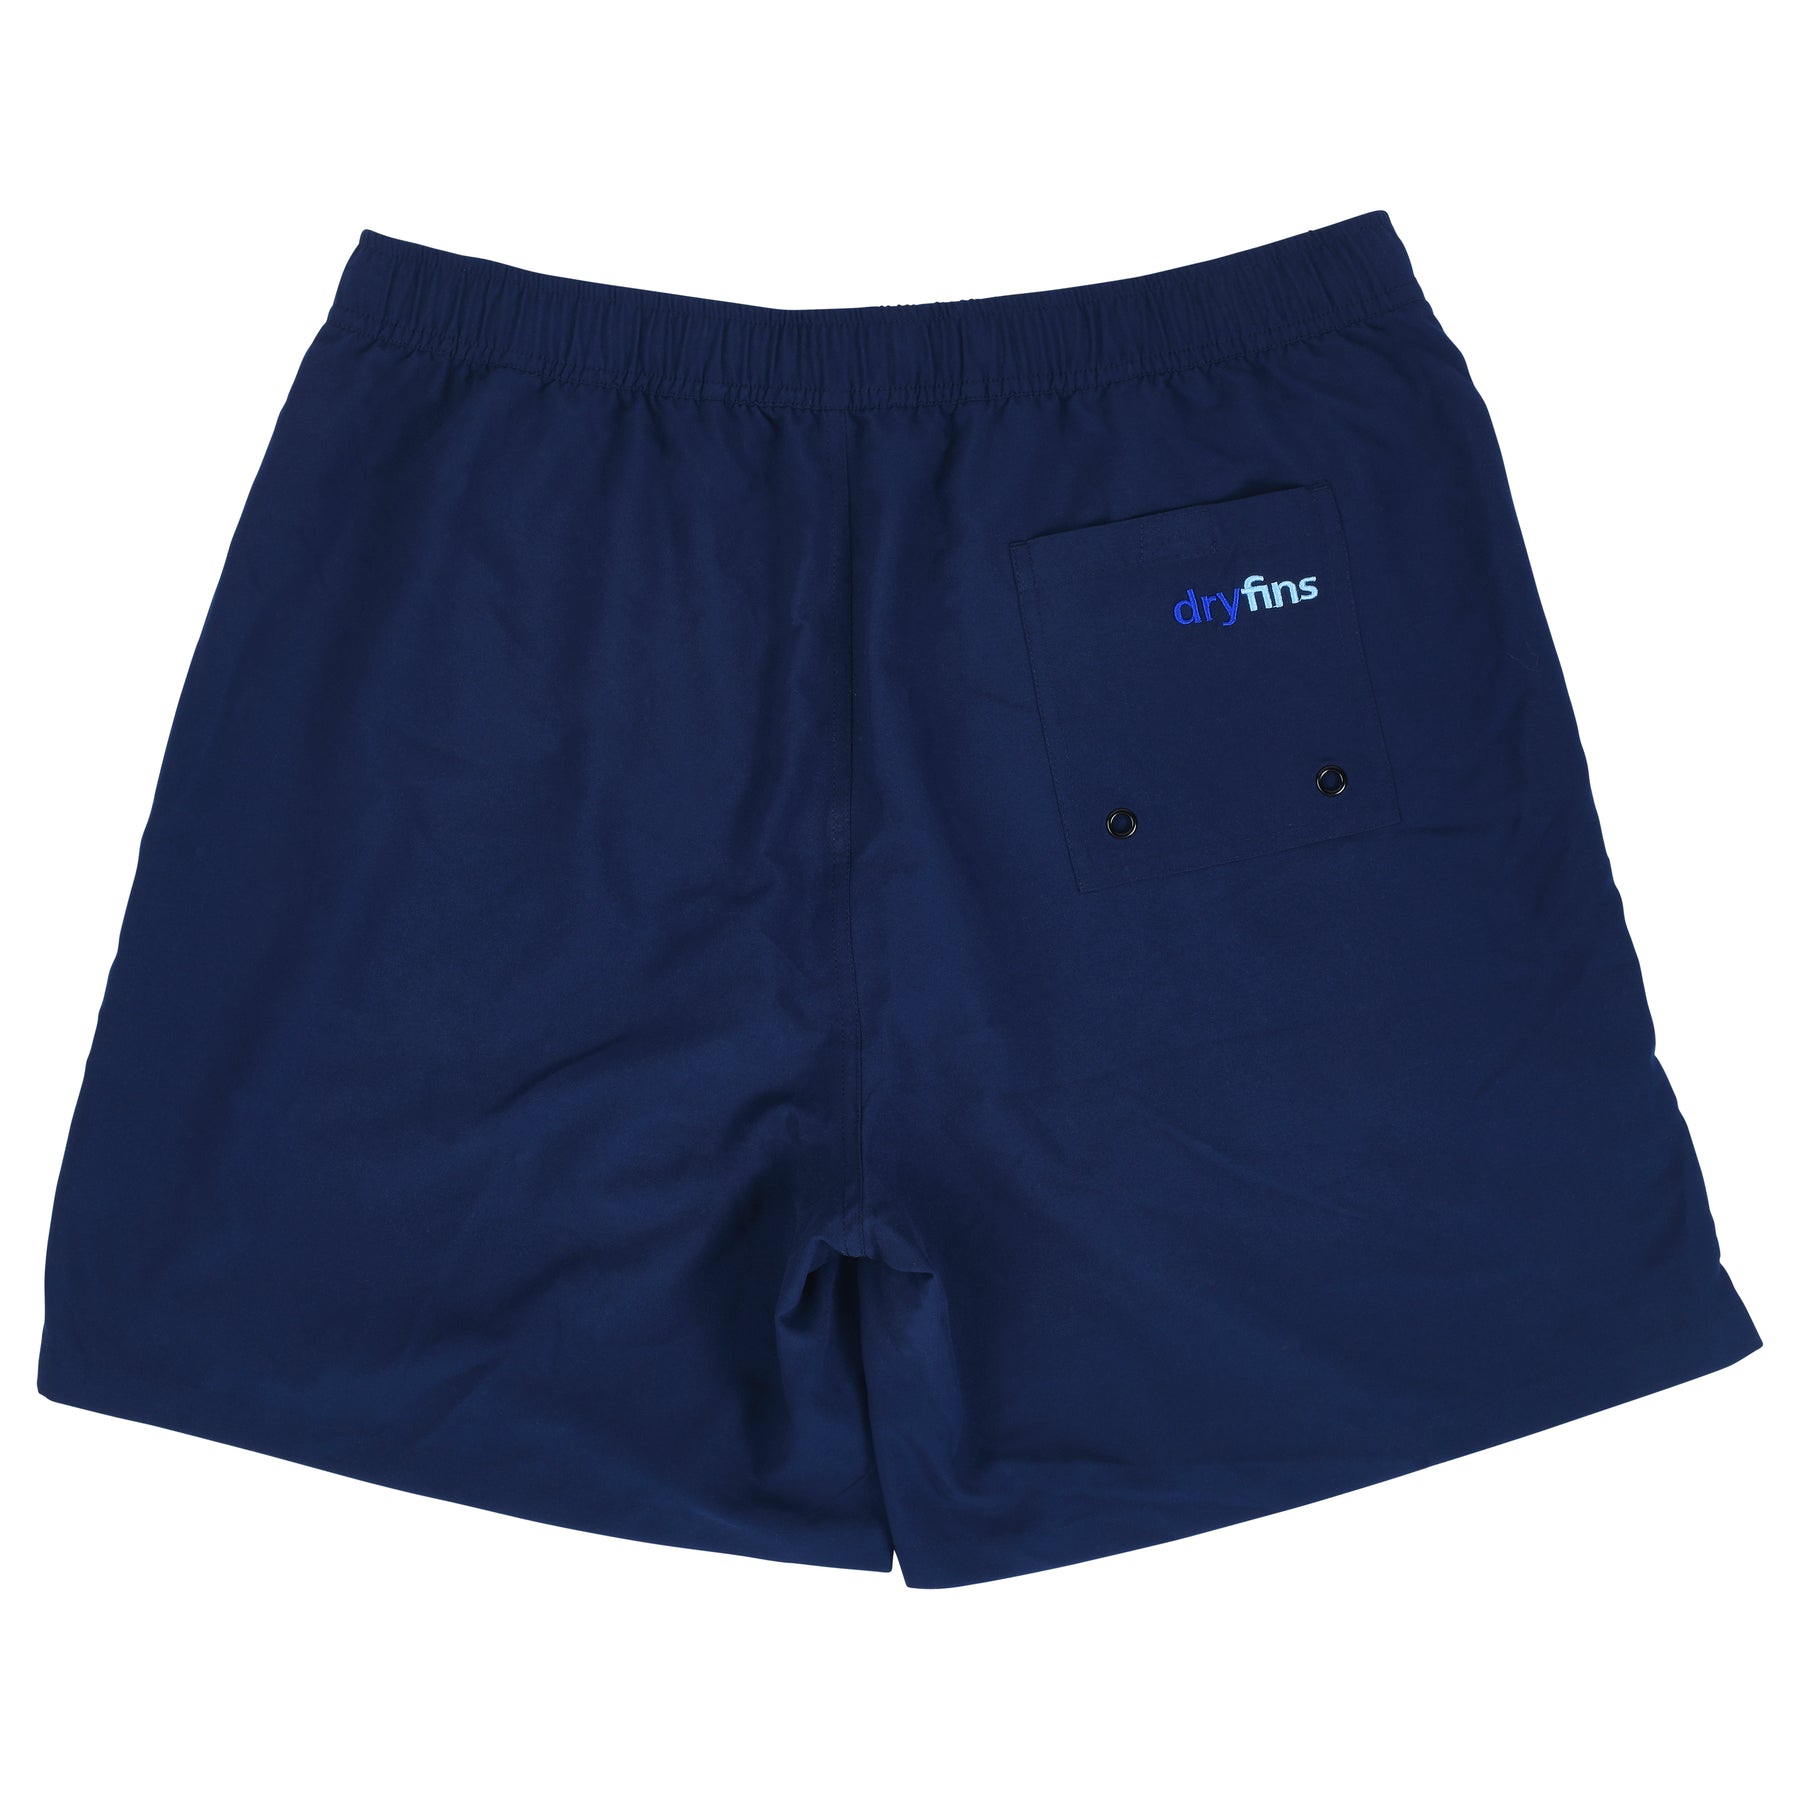 Men's Swim Trunks with Compression Liner, Midnight Blue